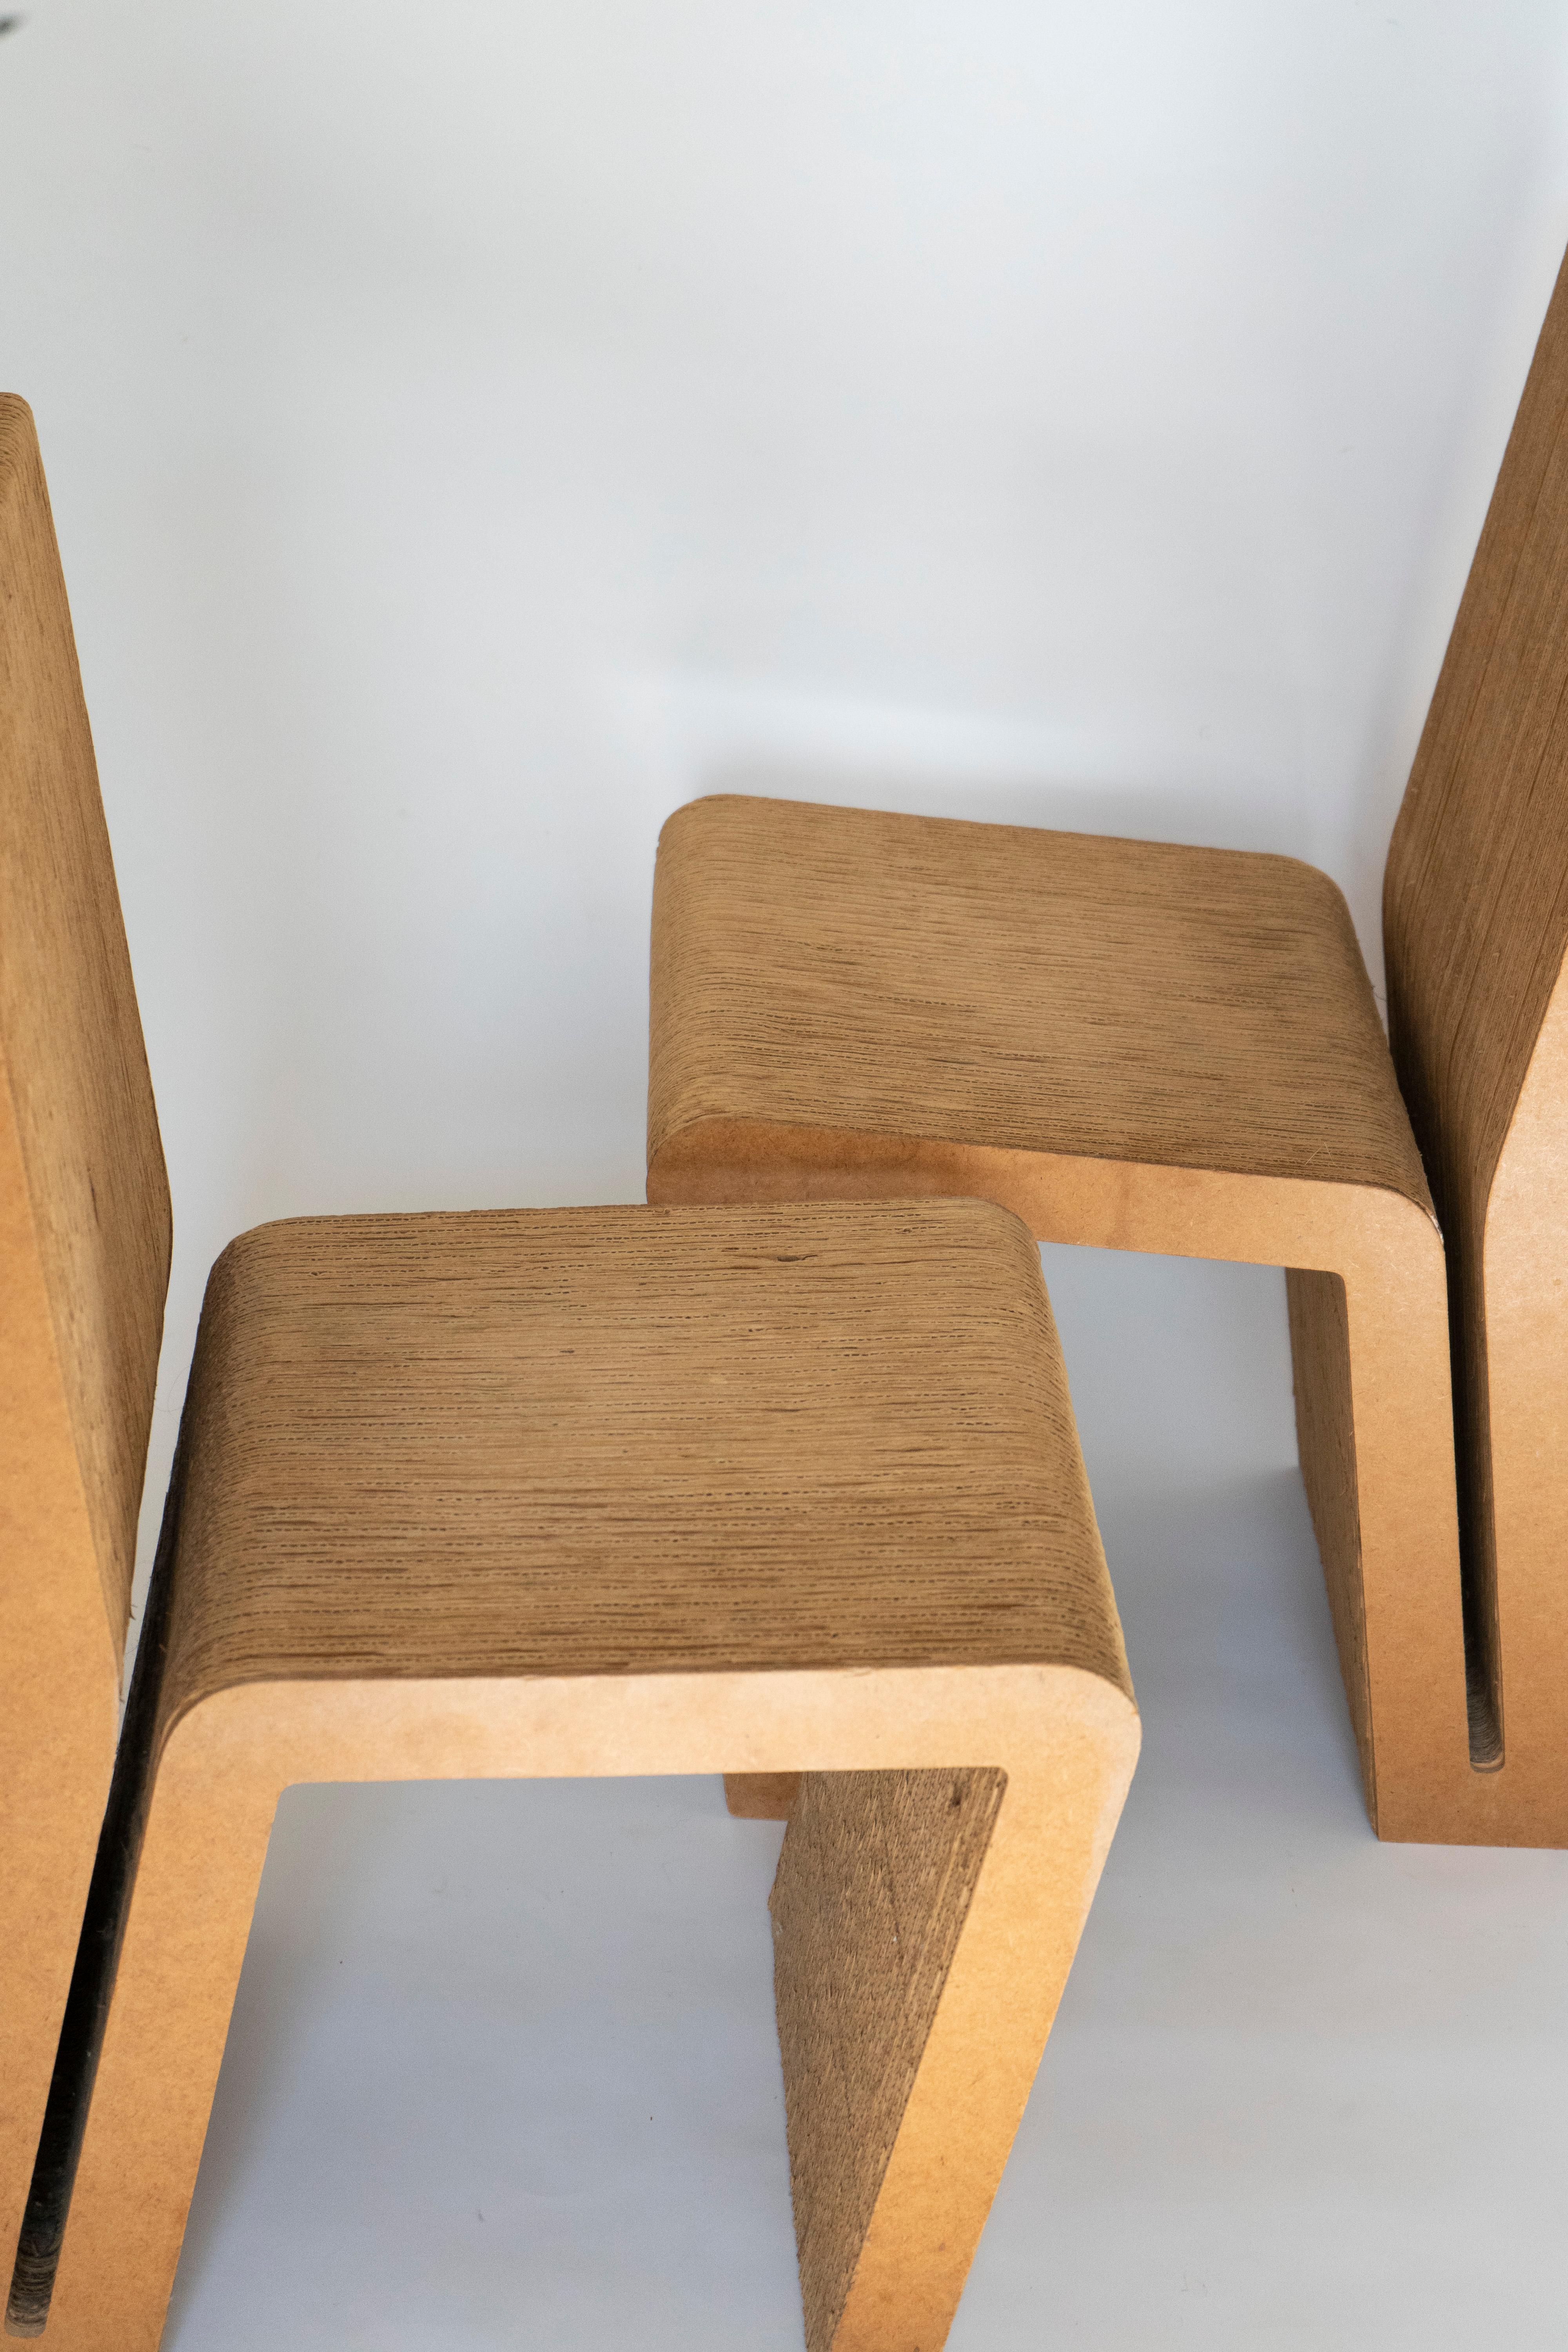 Easy Edges Cardboard Chair by Frank Gehry, Early 1970s Model In Good Condition For Sale In Pittsburgh, PA